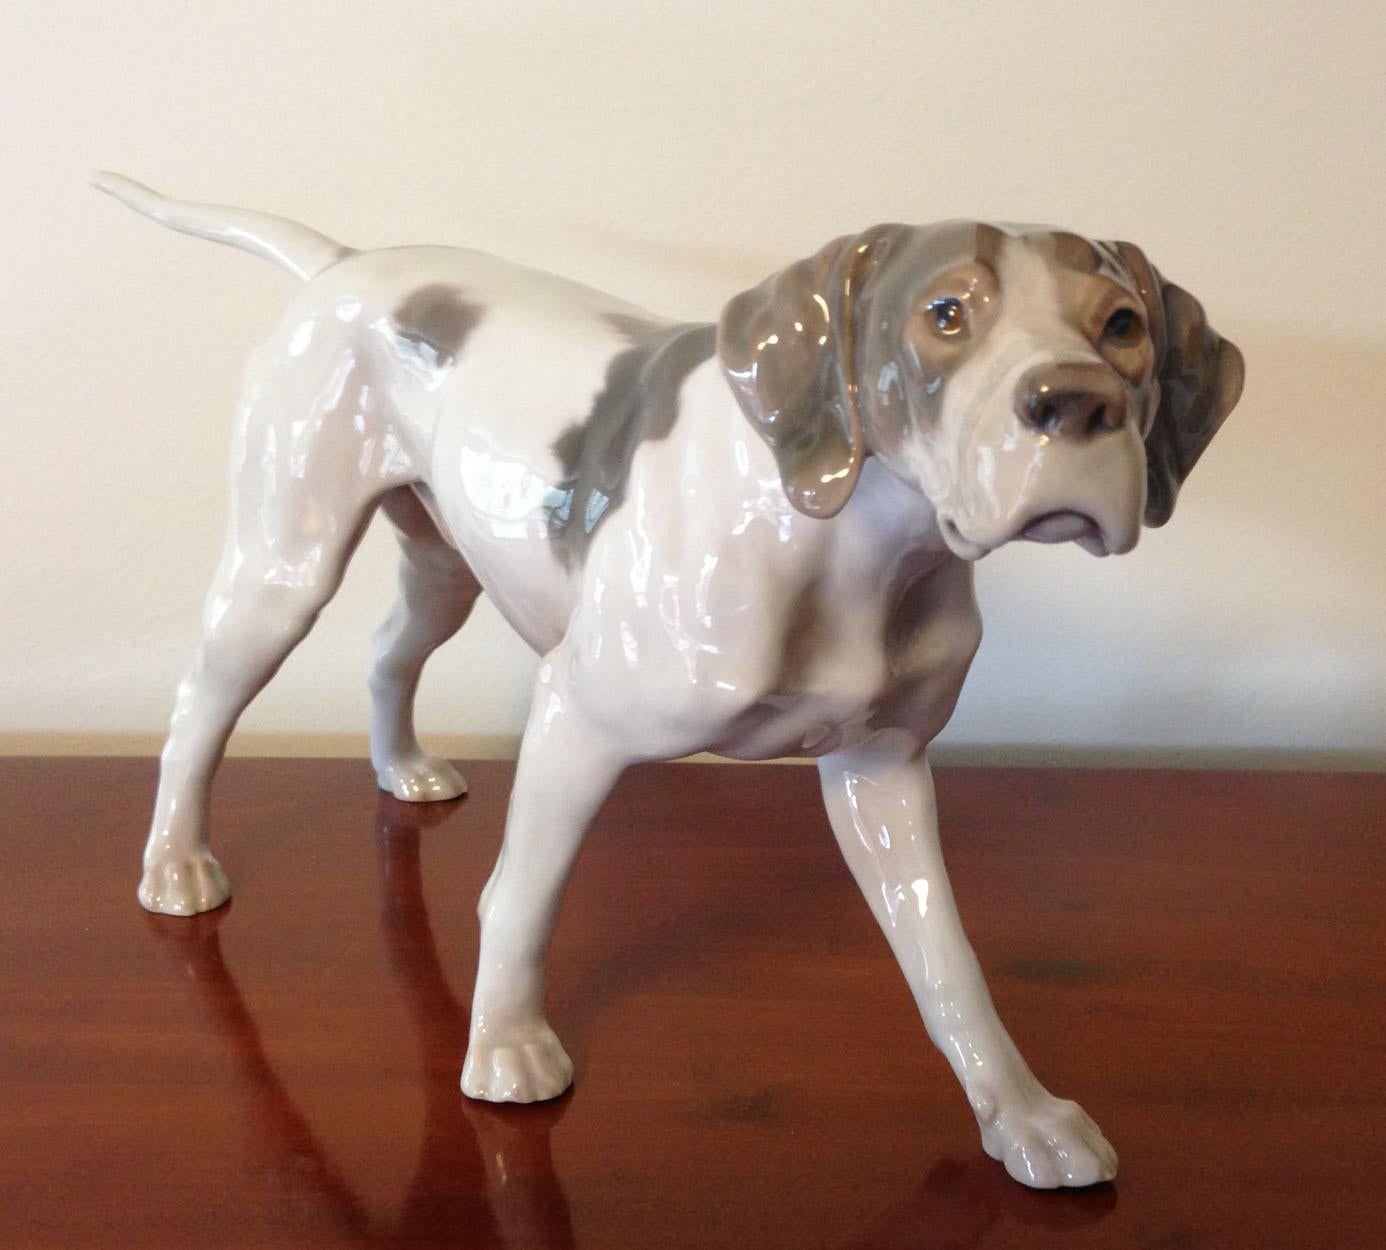 A rare Danish Bing & Grondahl brown and white figurine of a pointer dog, designed by Lauritz Jensen.

Marked and signed on bottom of the left hind leg B&G 2006 R - Model number 2006.

Marked on bottom of the right hind leg 3 towers B&G